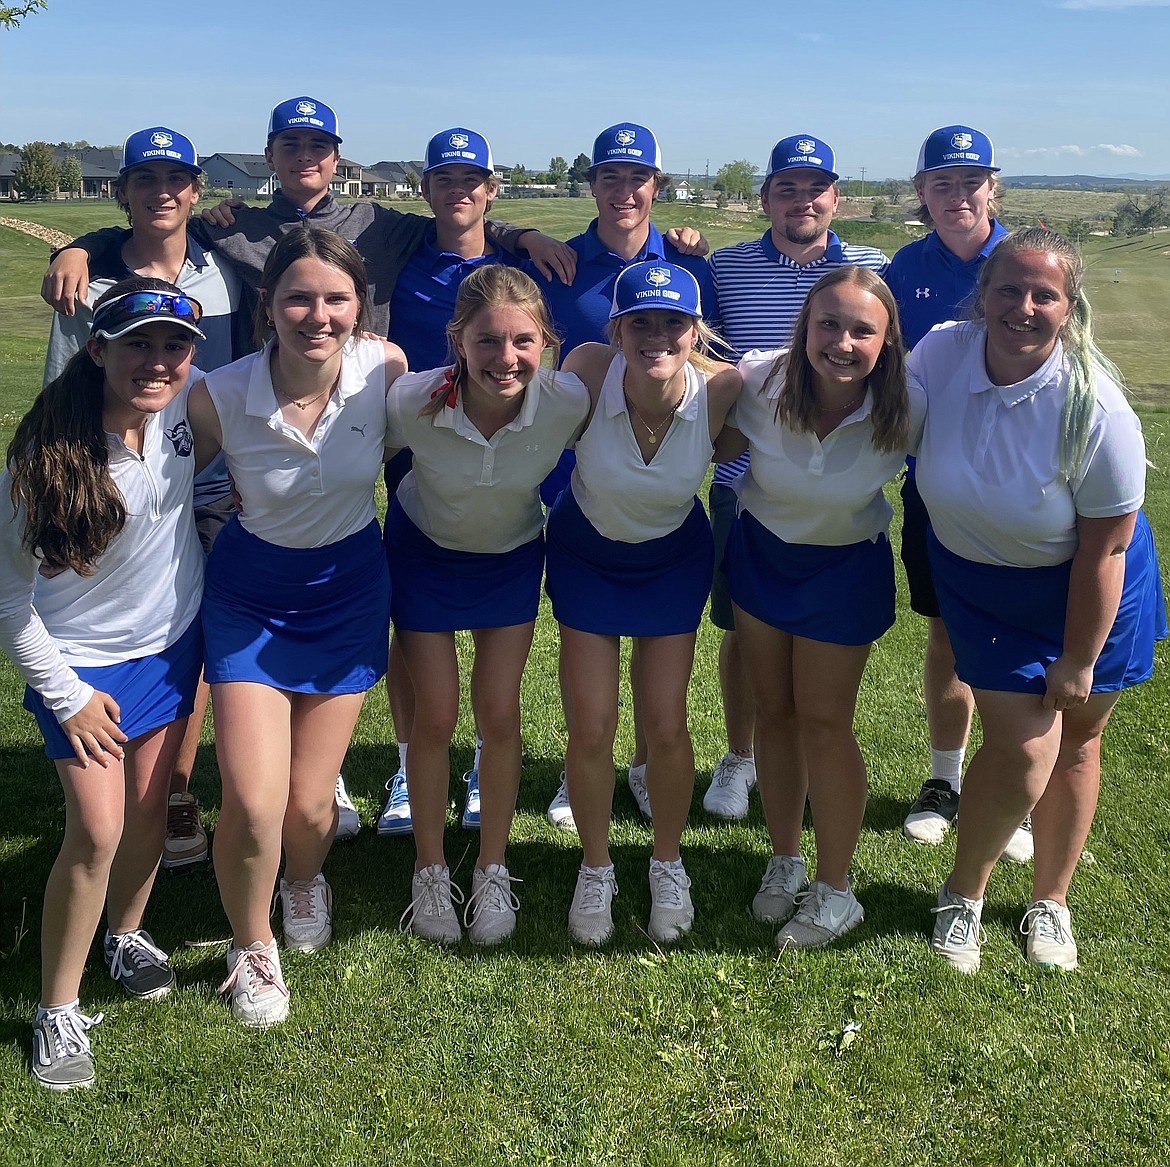 Courtesy photo
The Coeur d'Alene boys and girls golf teams wrapped up the season at the state 5A tournament at RedHawk Golf Course in Nampa. In the back row, from left, are: Jameson Dale, Luke West, Grant Potter, Parker Freeman, Cole Jaworski and Trey Nipp. In the front are: Hayden Crenshaw, Peyton Blood, Paige Crabb, Taylor Potter, Brianna Priest and Cassie Lee.